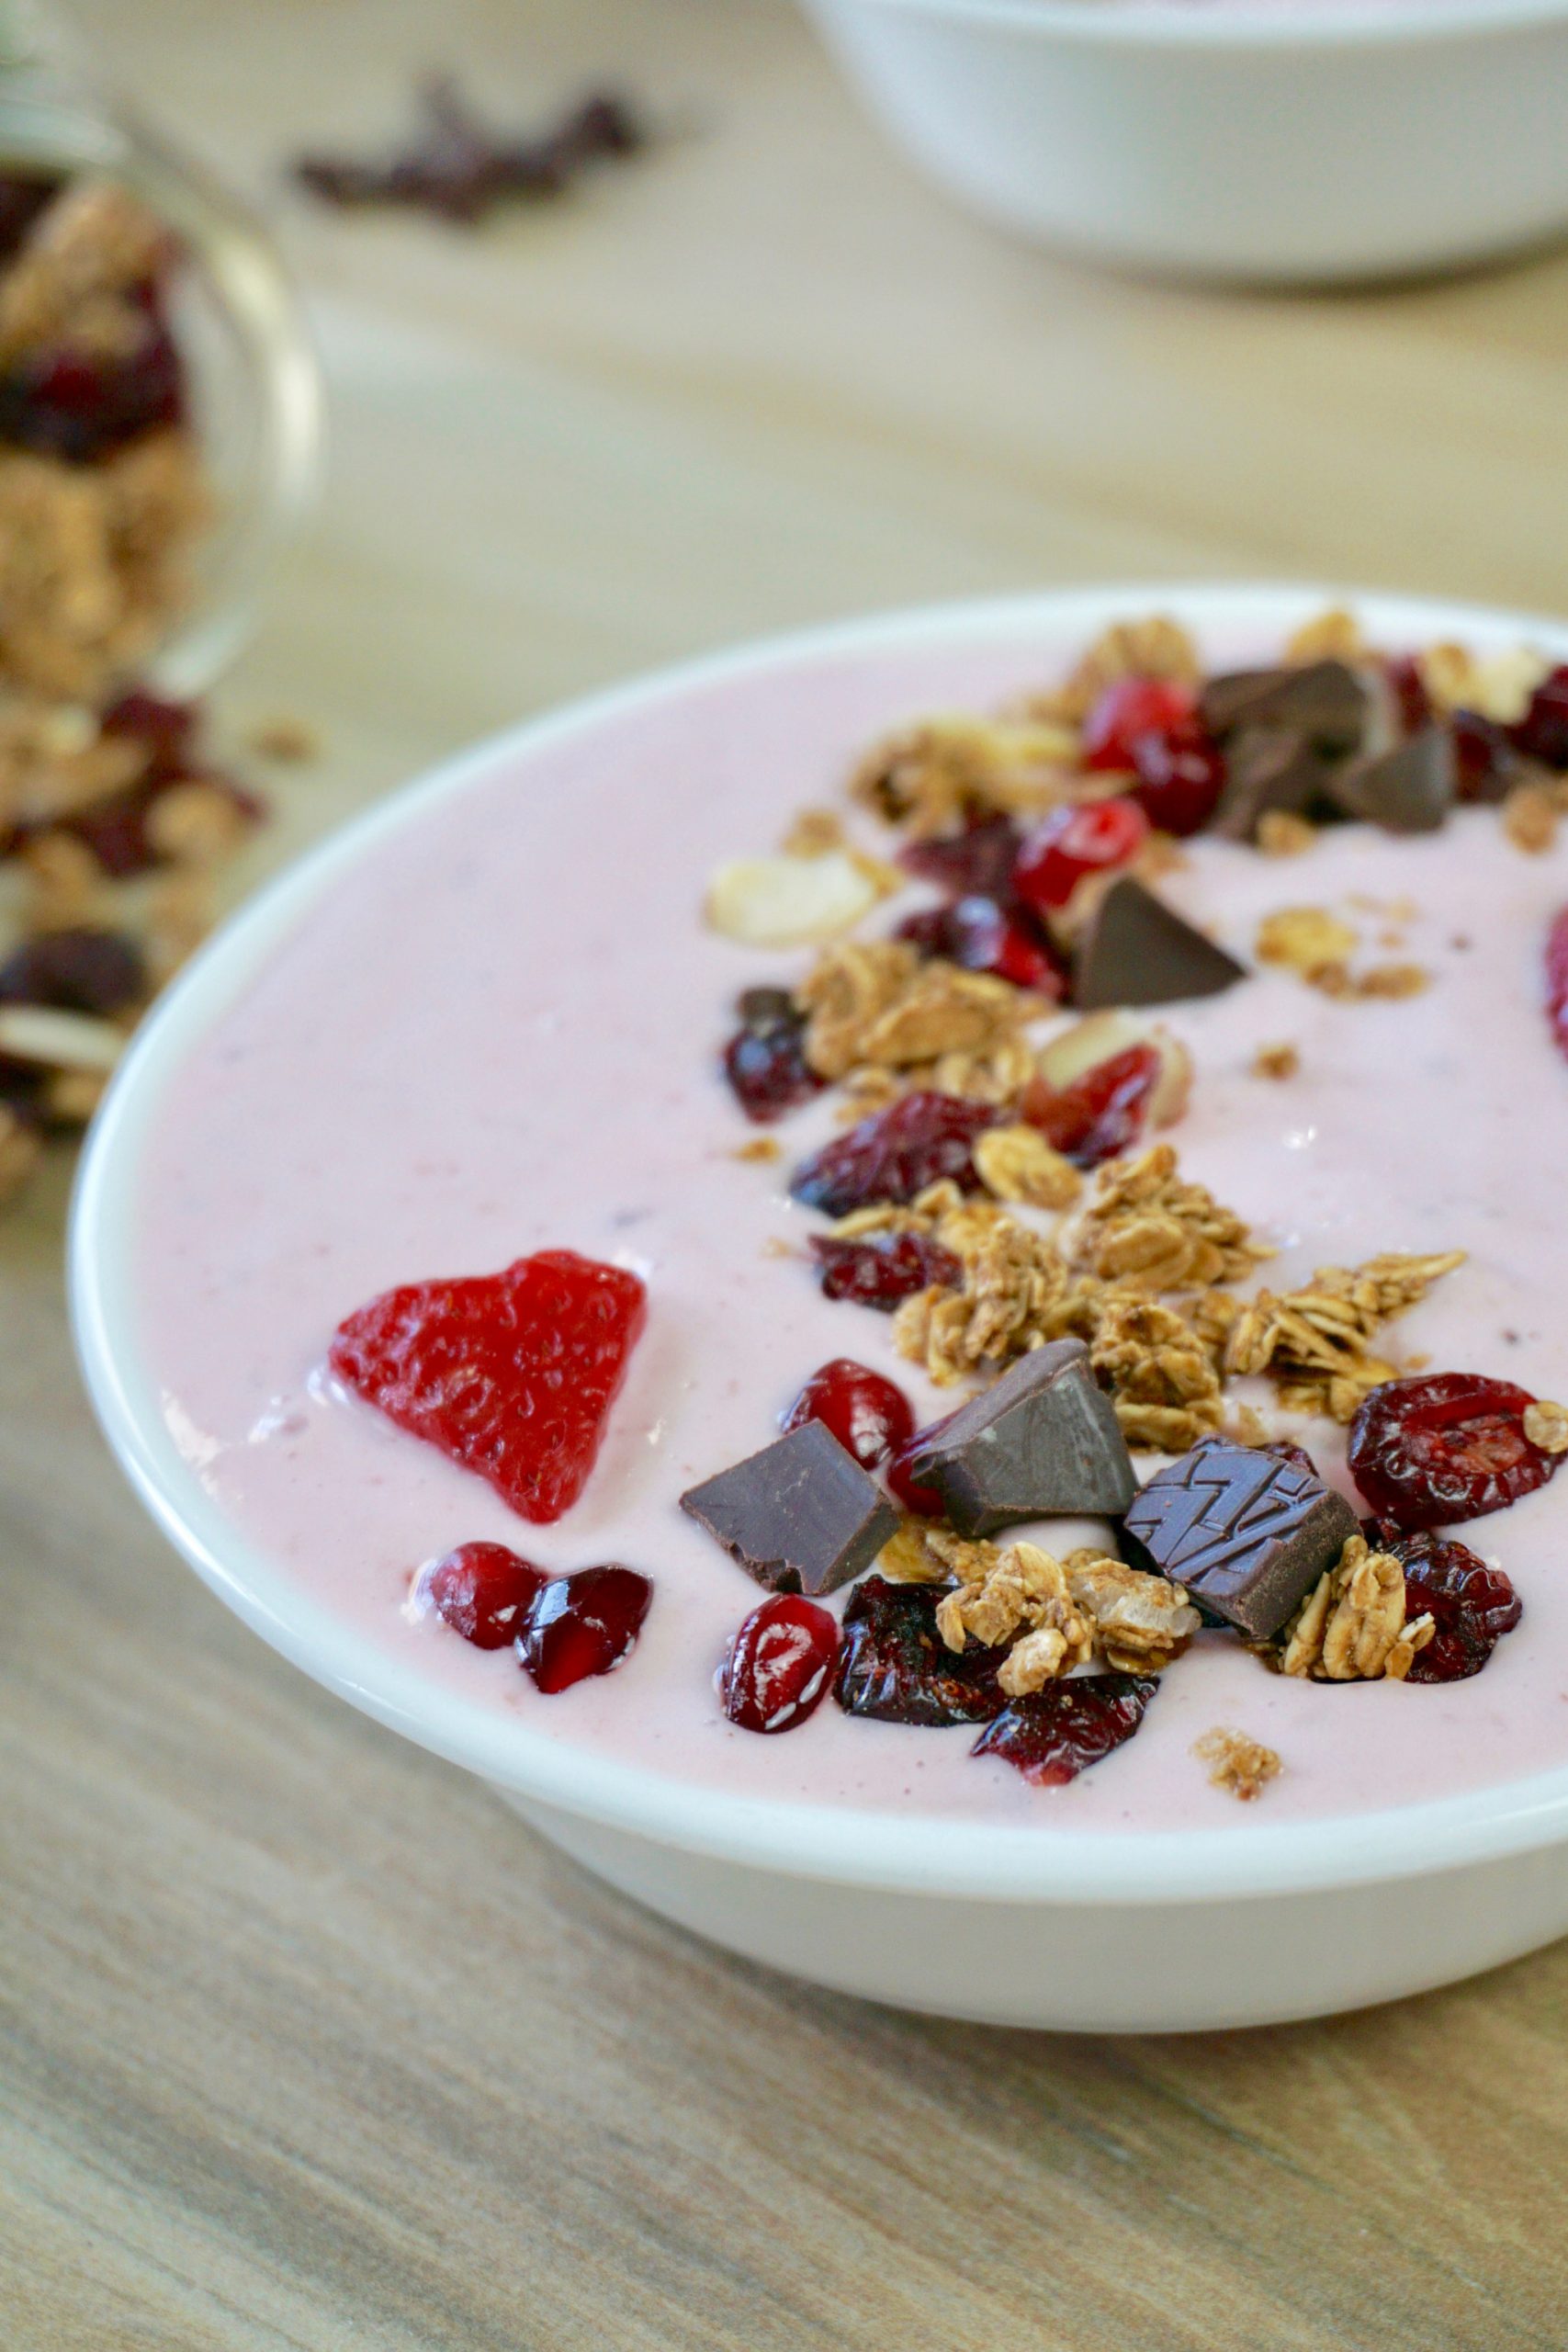 Red berries and chocolate protein smoothie bowl Valentine's recipe